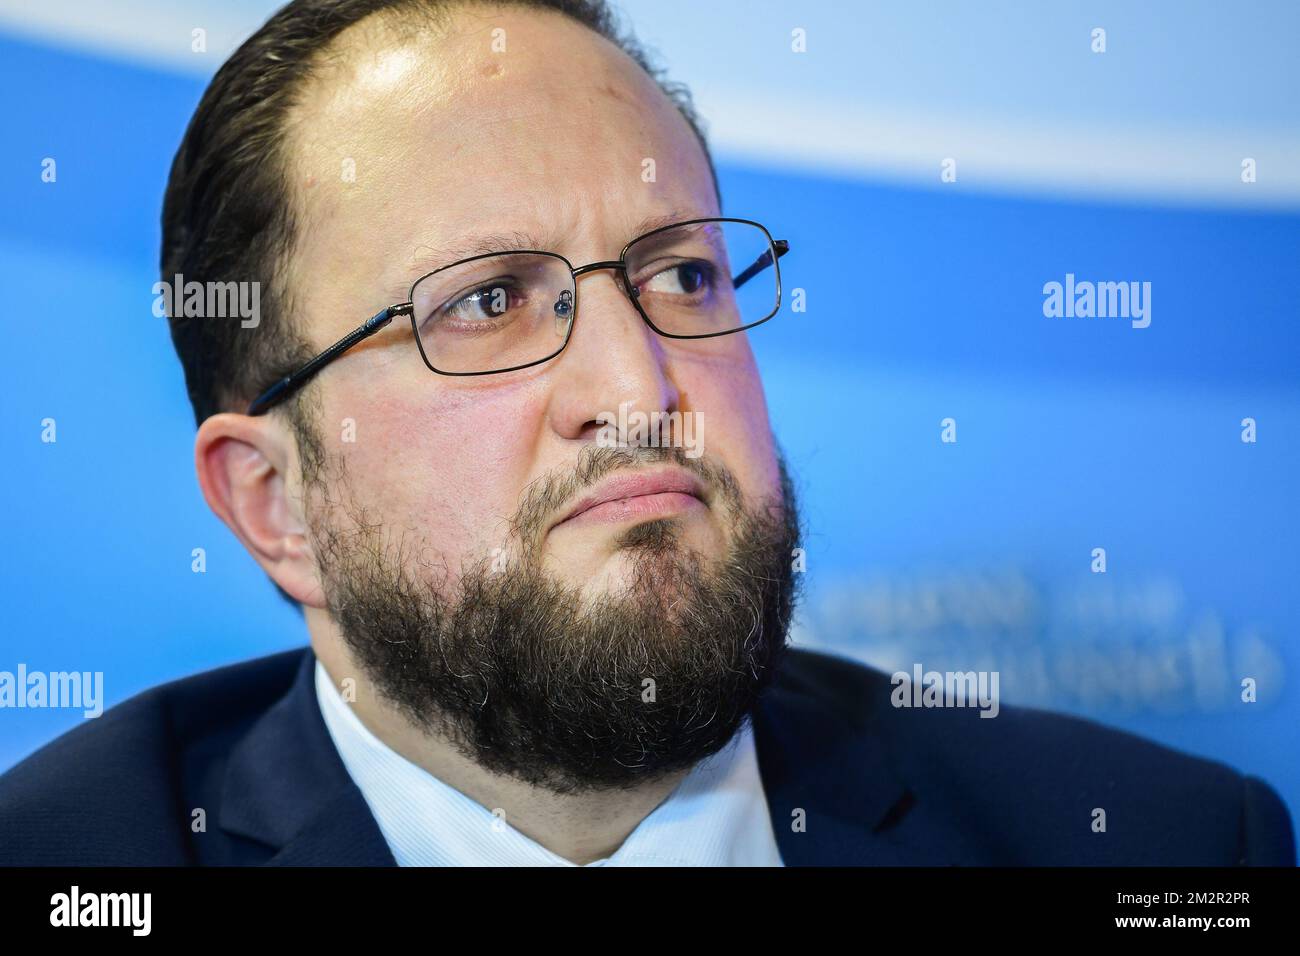 Belgian cultural islamic center Vice-President Nordine Taouil pictured during a press conference to present the new association called the Belgian cultural islamic center (centre culturel islamique de Belgique - Cultureel Islamitisch Centrum van Belgie), to manage the Great Mosque of Brussels, Wednesday 27 February 2019. BELGA PHOTO LAURIE DIEFFEMBACQ Stock Photo